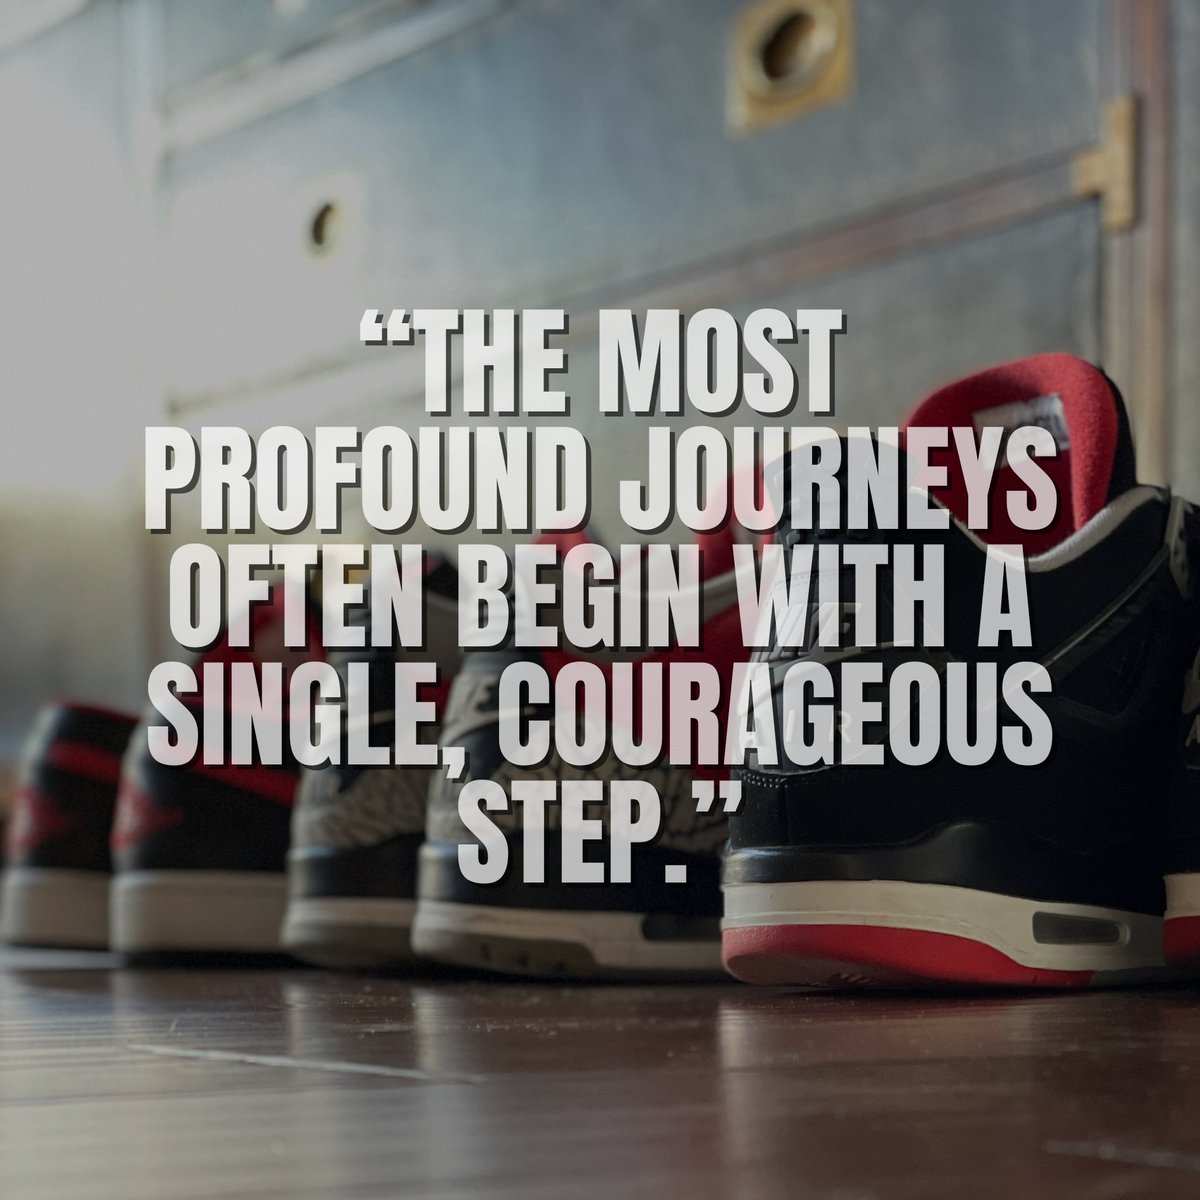 It takes courage to take the first step, but that step can lead to the most incredible journeys. Dare to step forward. 
.
.
.
#Courage #FirstStep #JourneyBegins #Mindset #IslandMentor #Coaching #Mentorship #motivational #quotes #inspirational